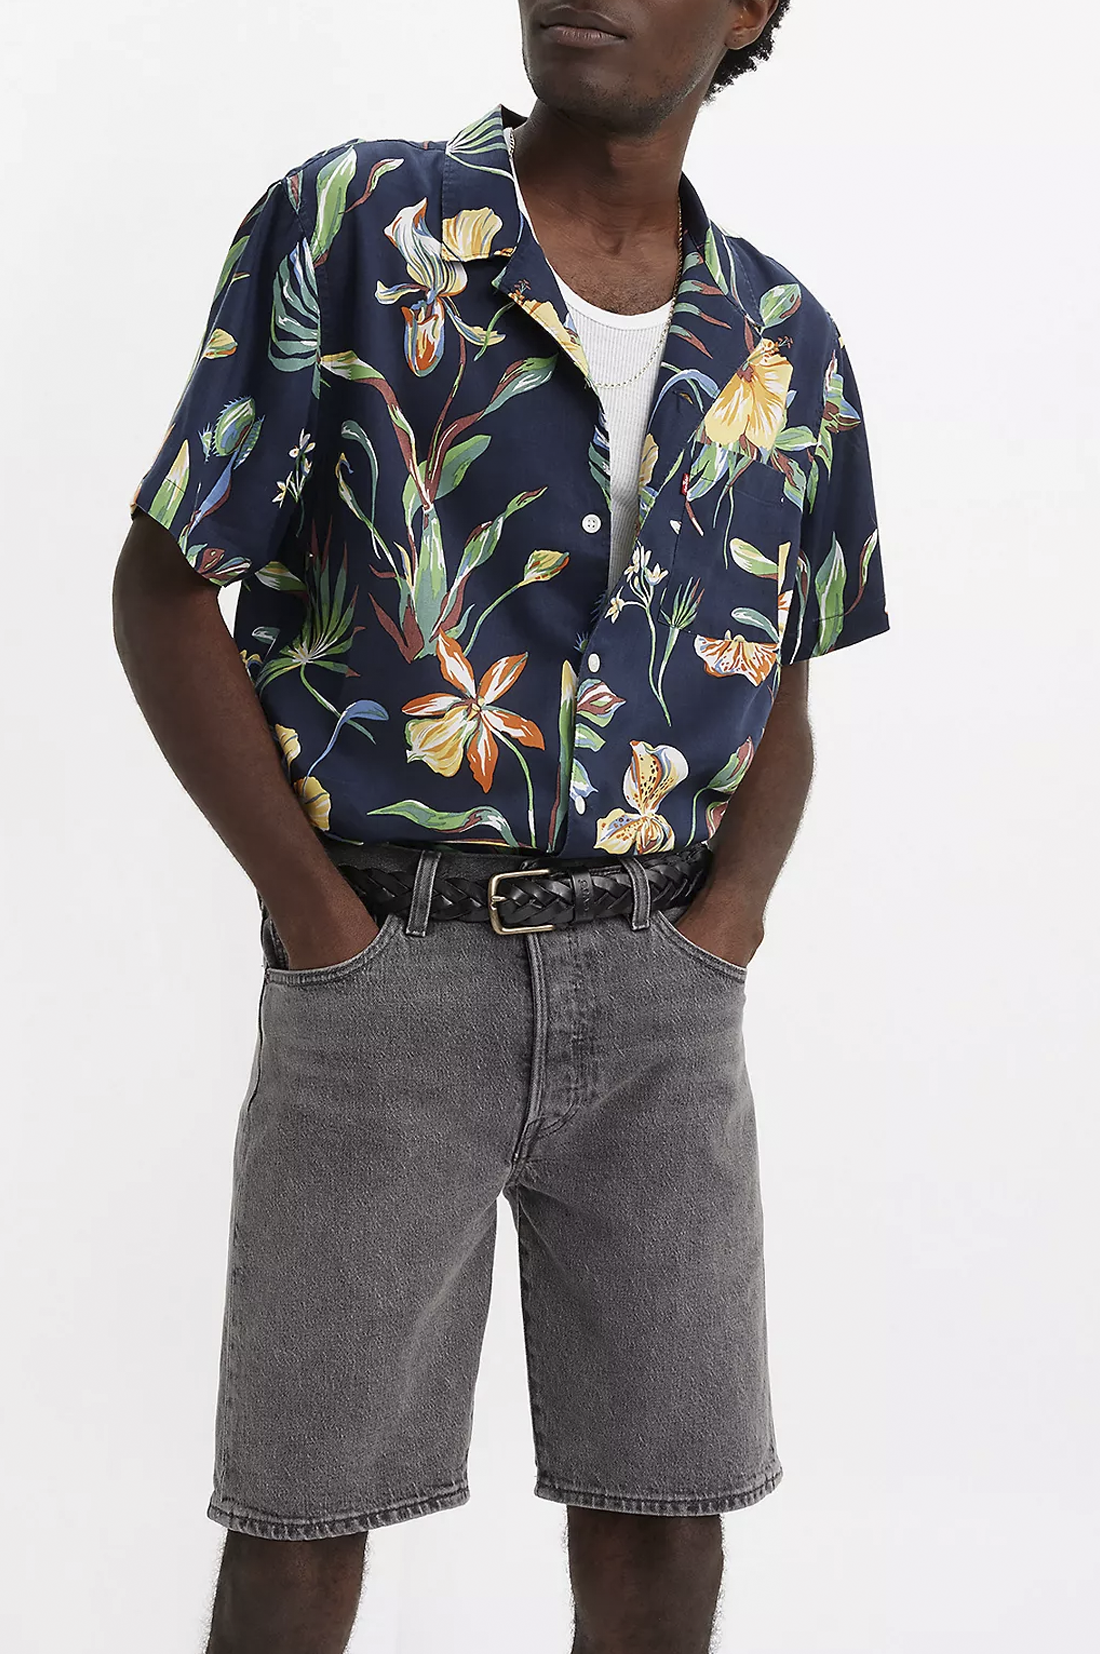 Men's Levi's The Sunset Camp Shirt in Nepenthe Floral